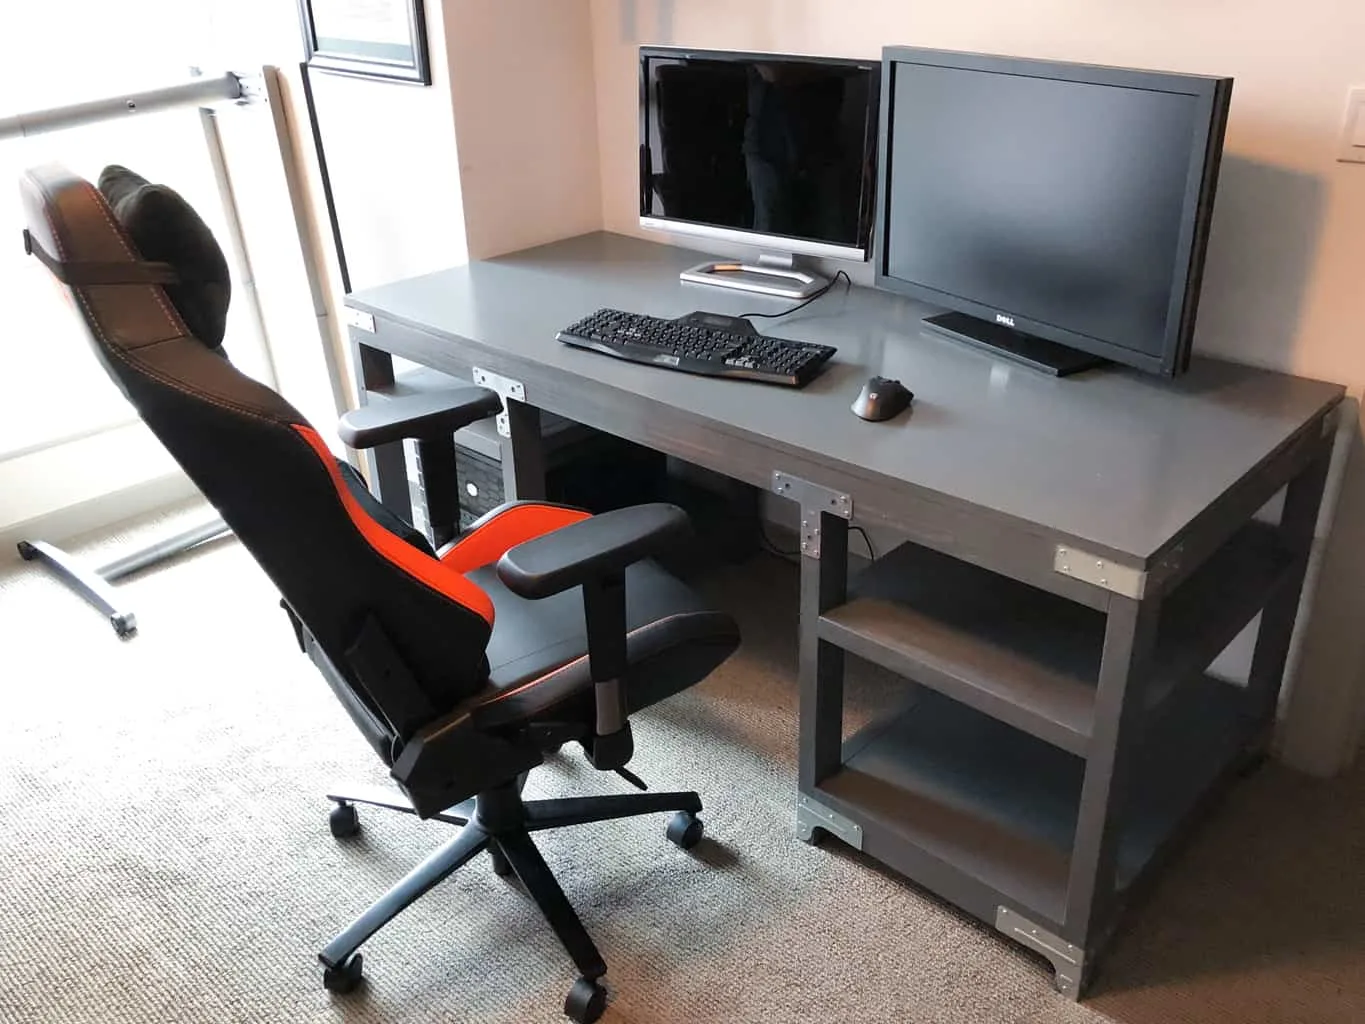 Computer Desk, Woodworking Project